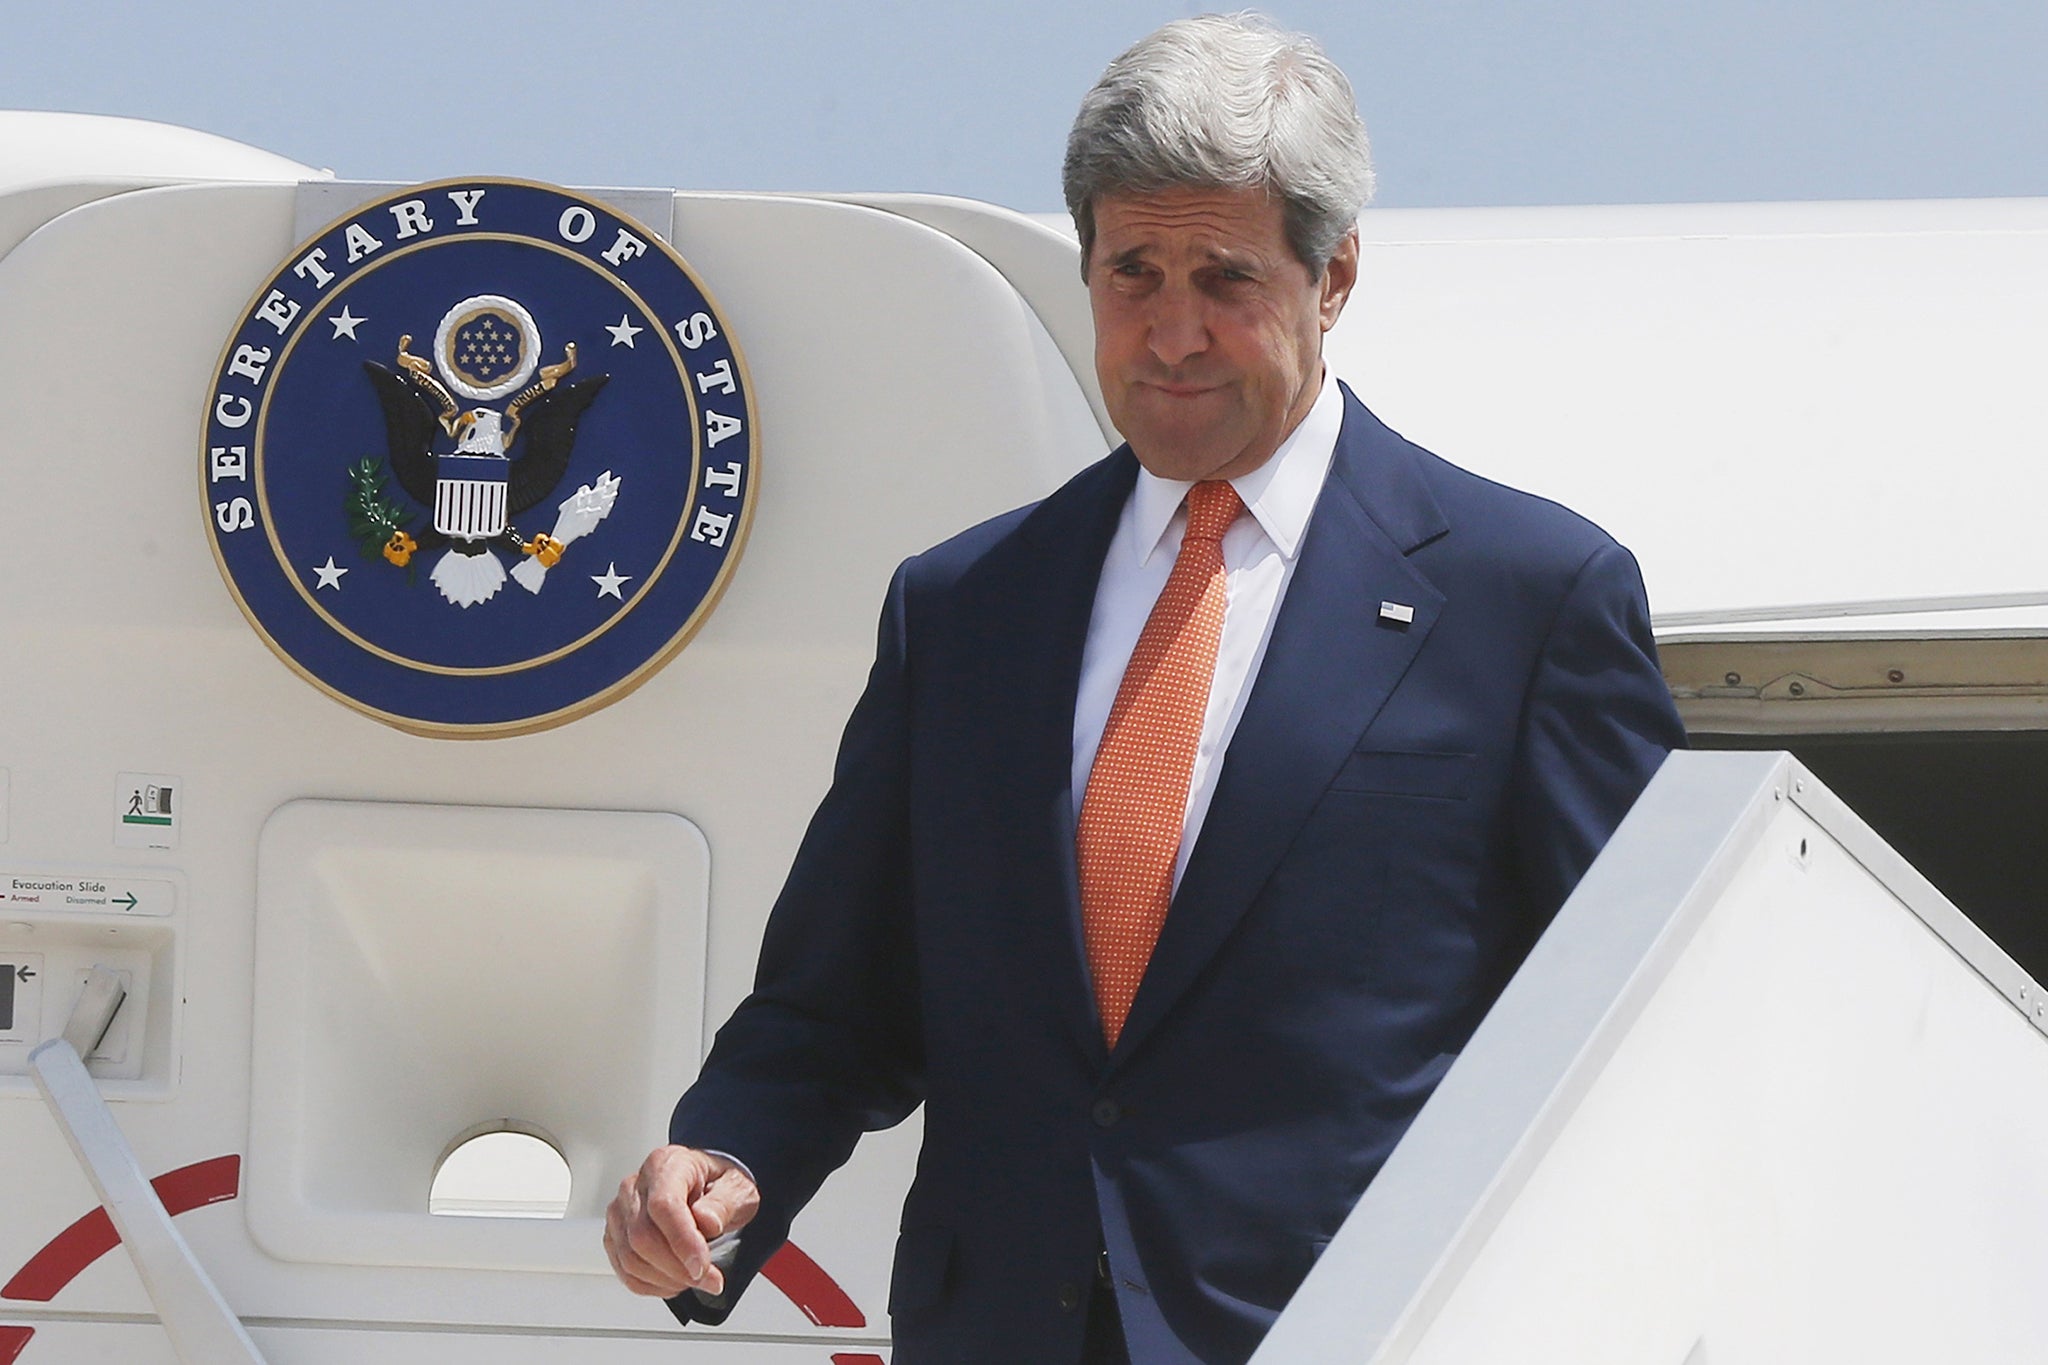 US Secretary of State John Kerry arrives in Tel Aviv steps out from his plane at Ben Gurion airport as he arrives in Israel